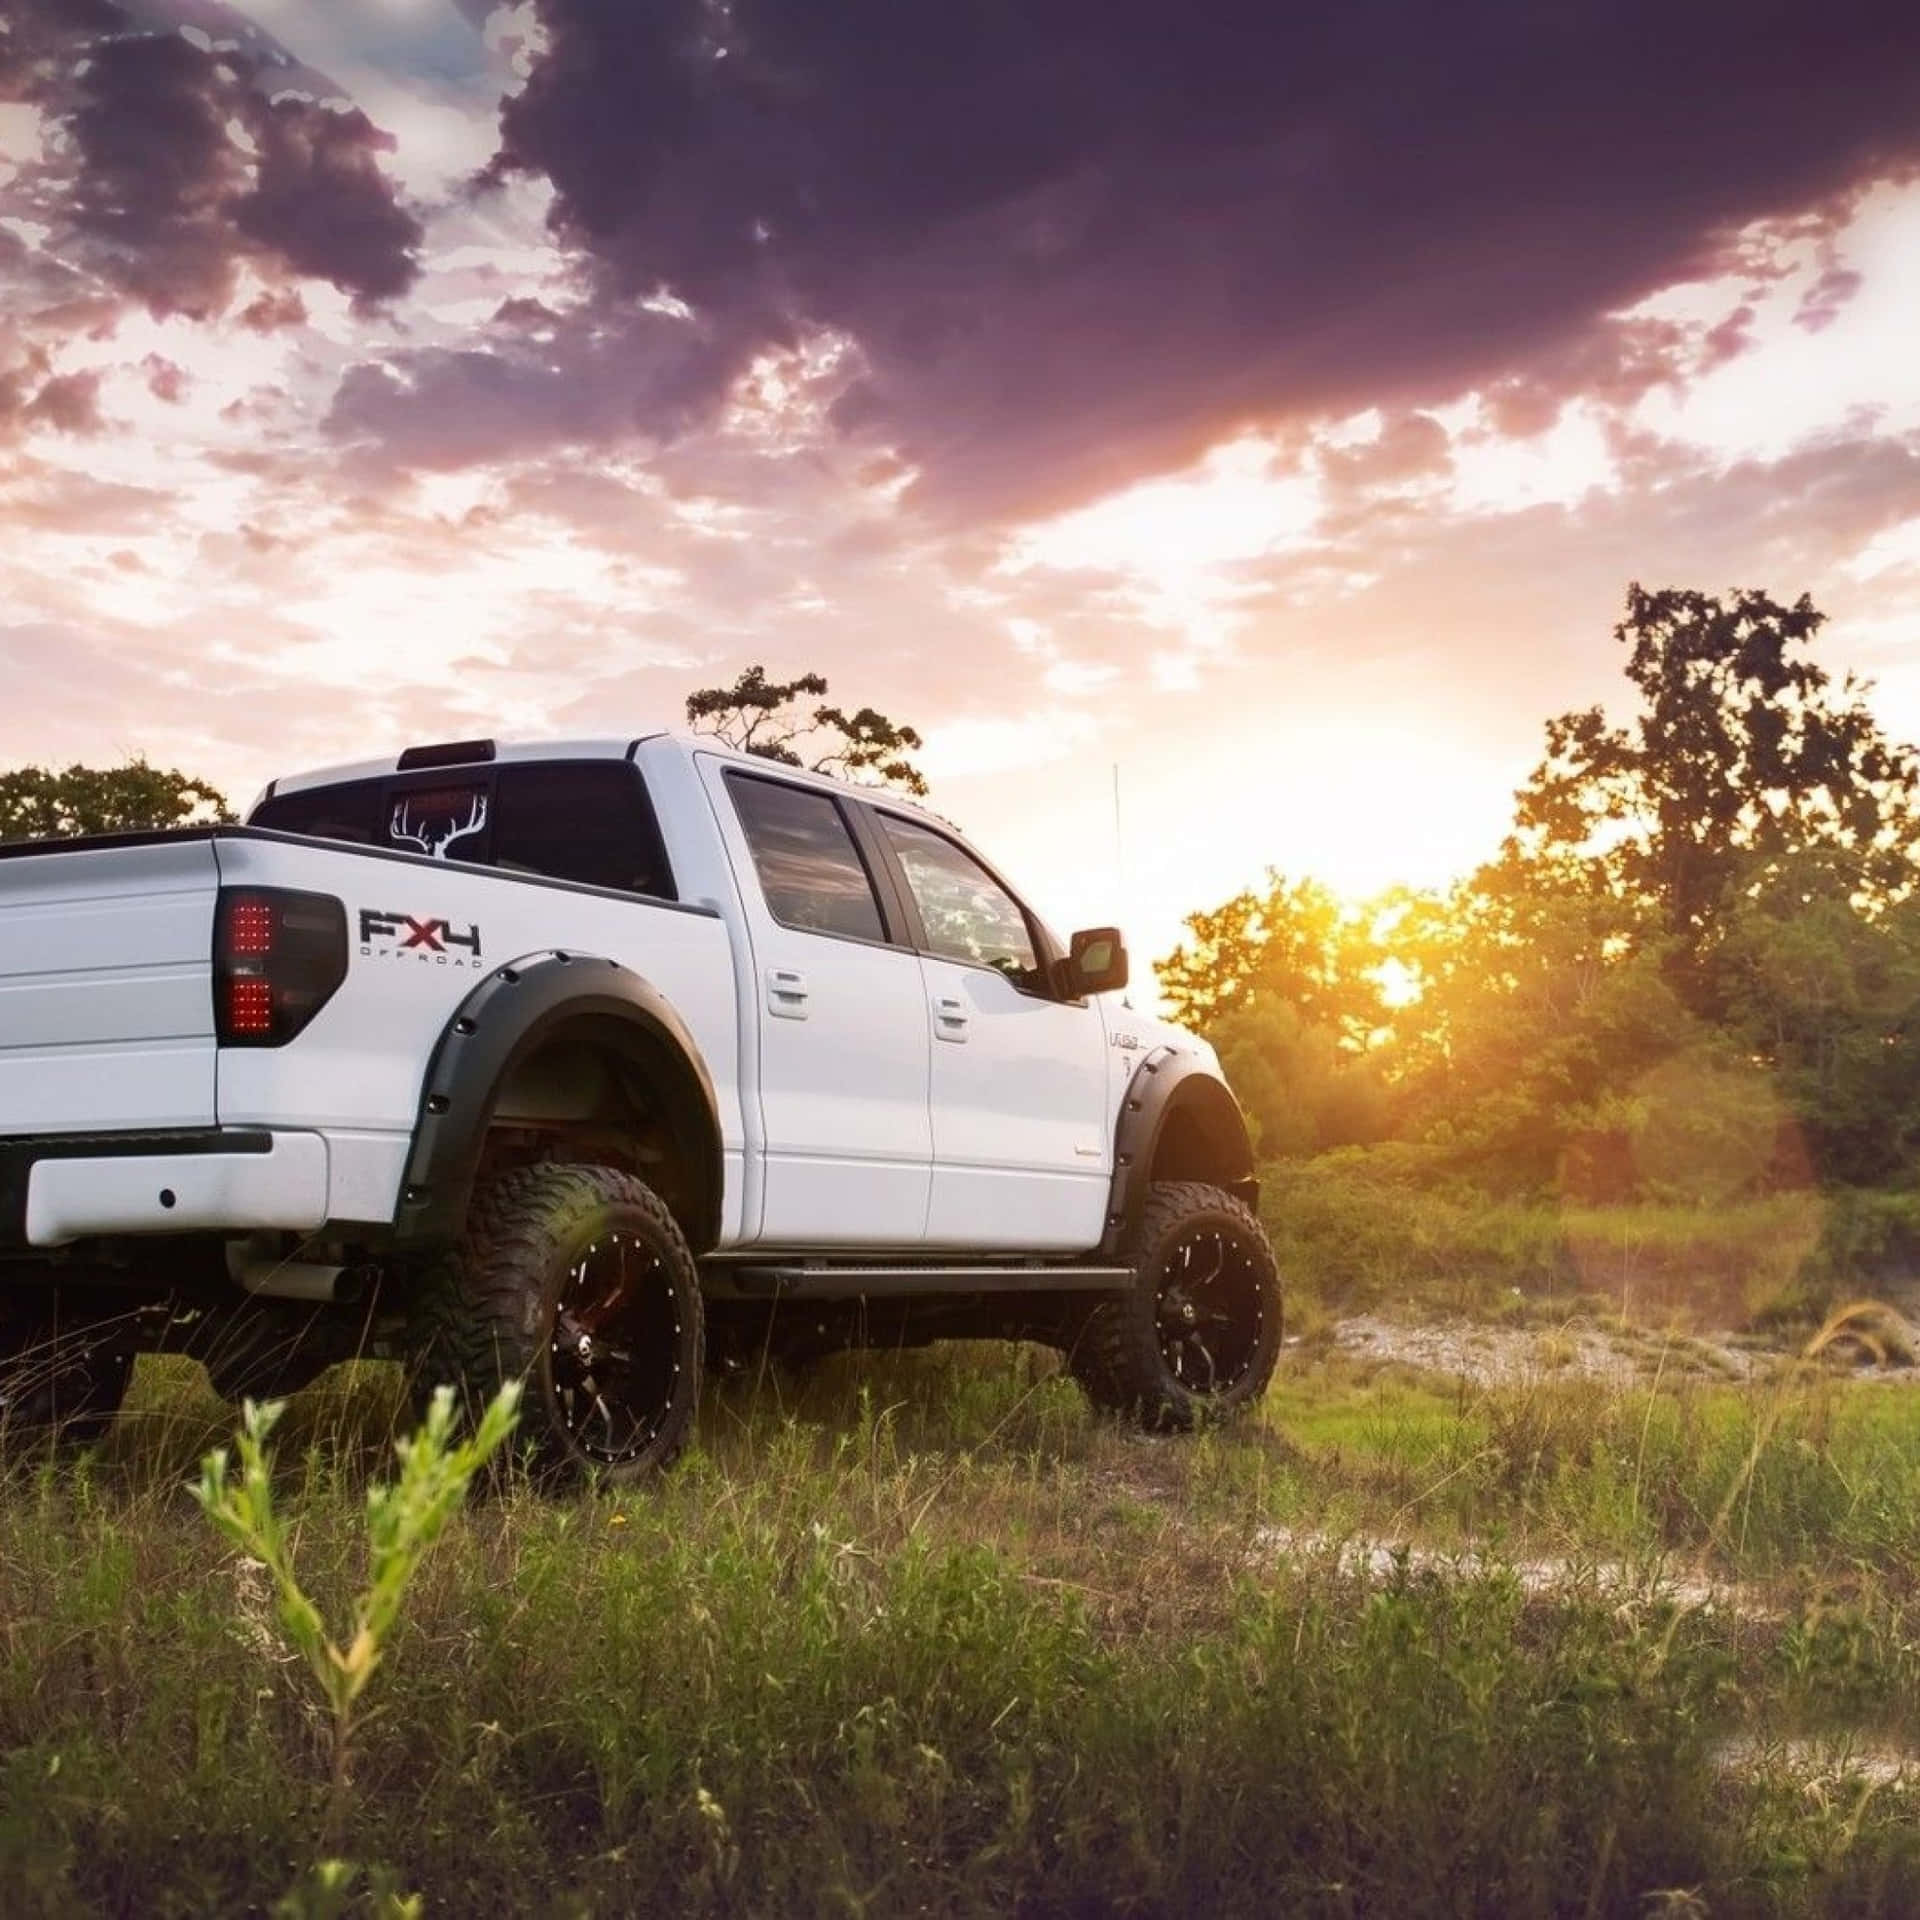 A White Truck Parked In A Field At Sunset Background